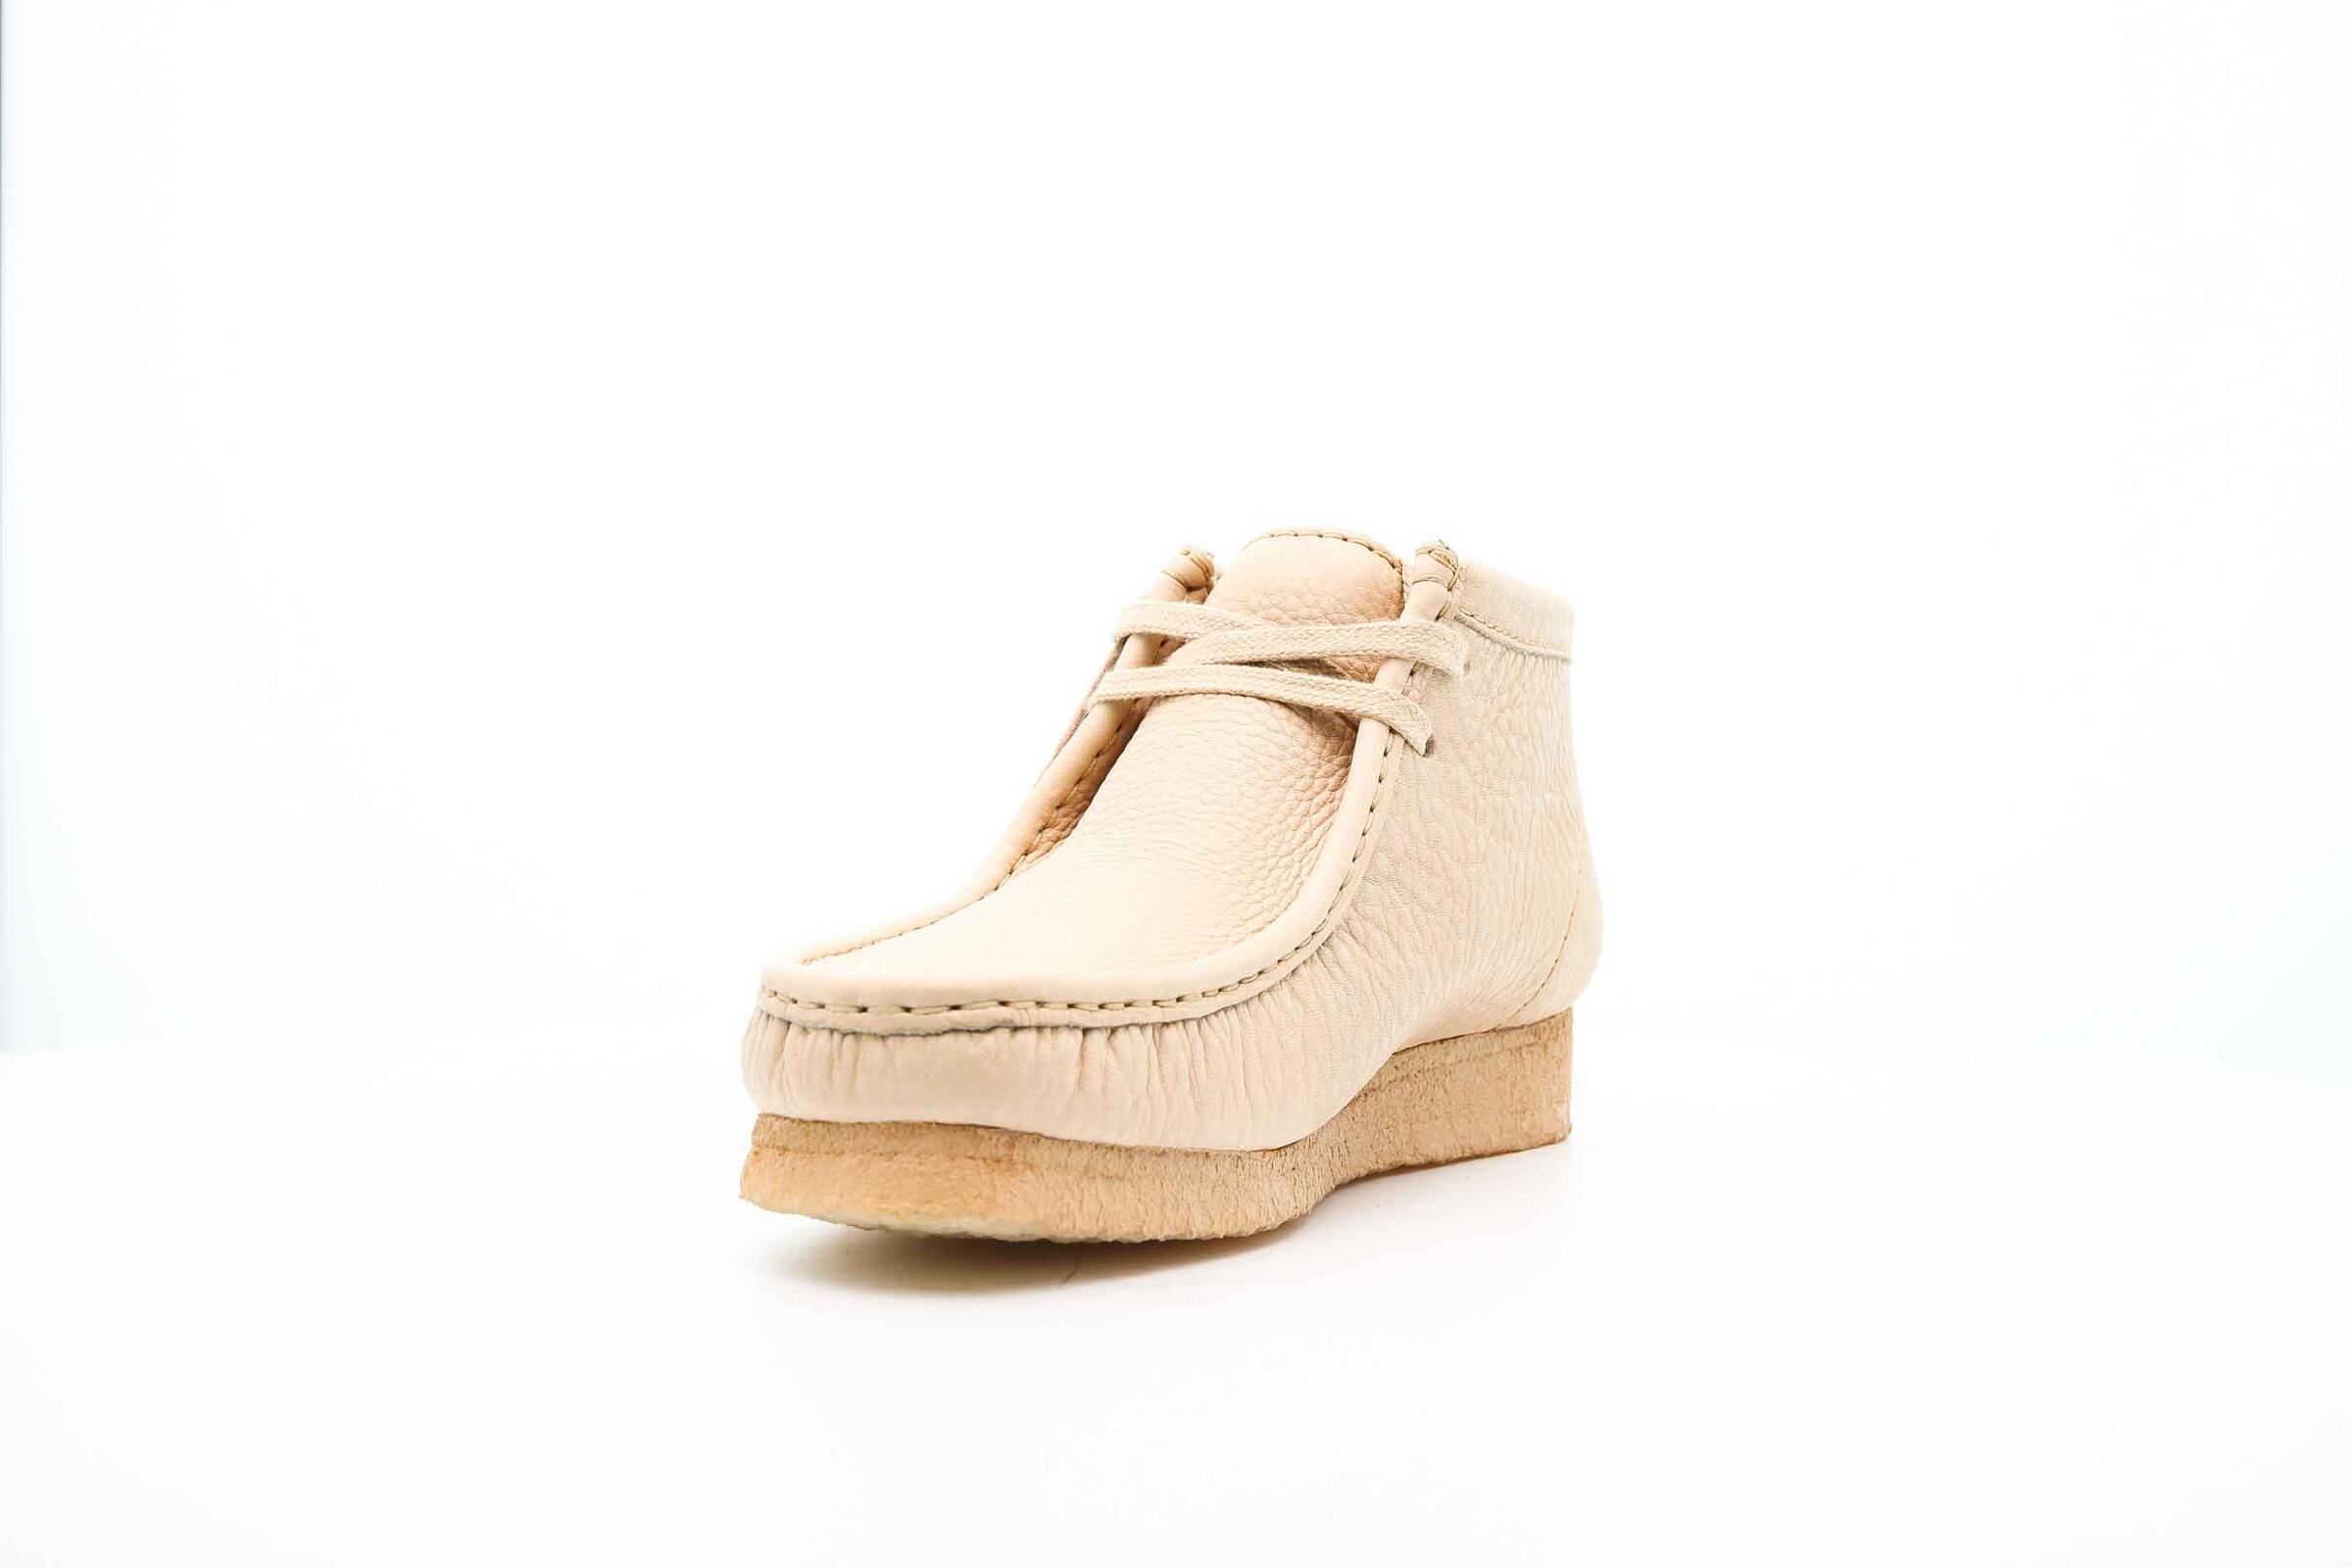 Clarks Originals x SPORTY AND RICH WALLABEE BOOT "OFF WHITE"